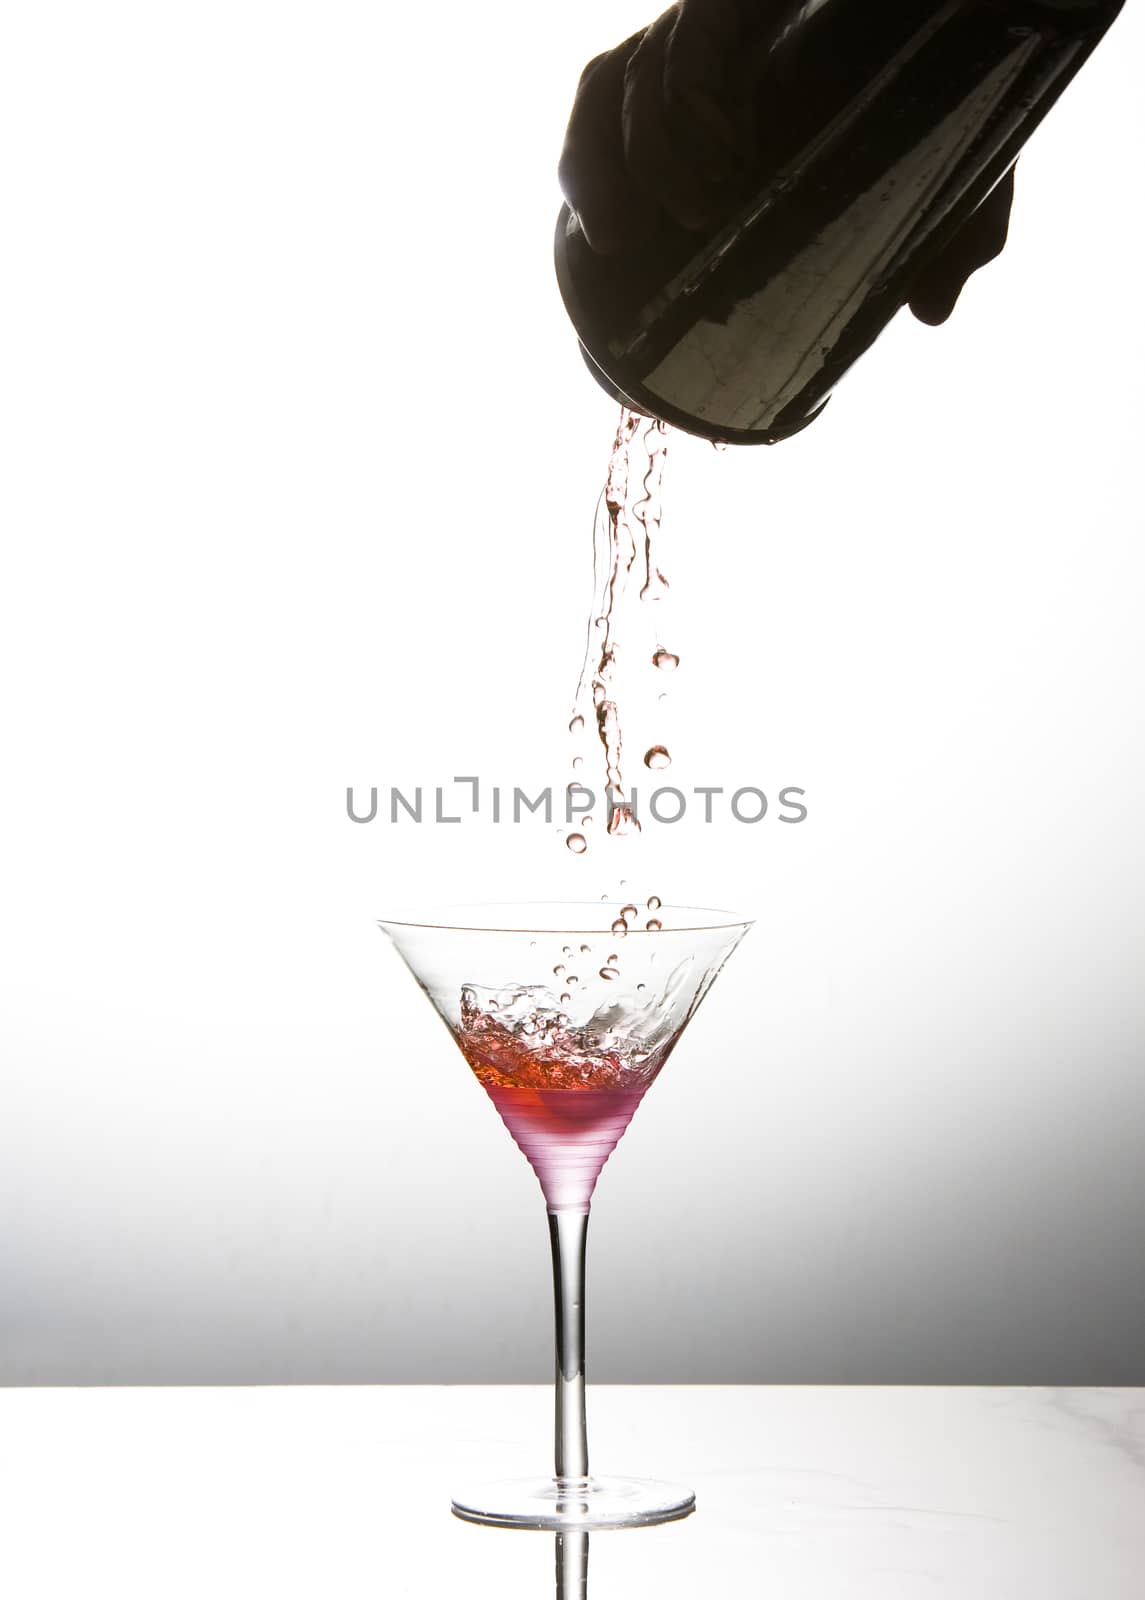 Cocktail being poured into martini glass